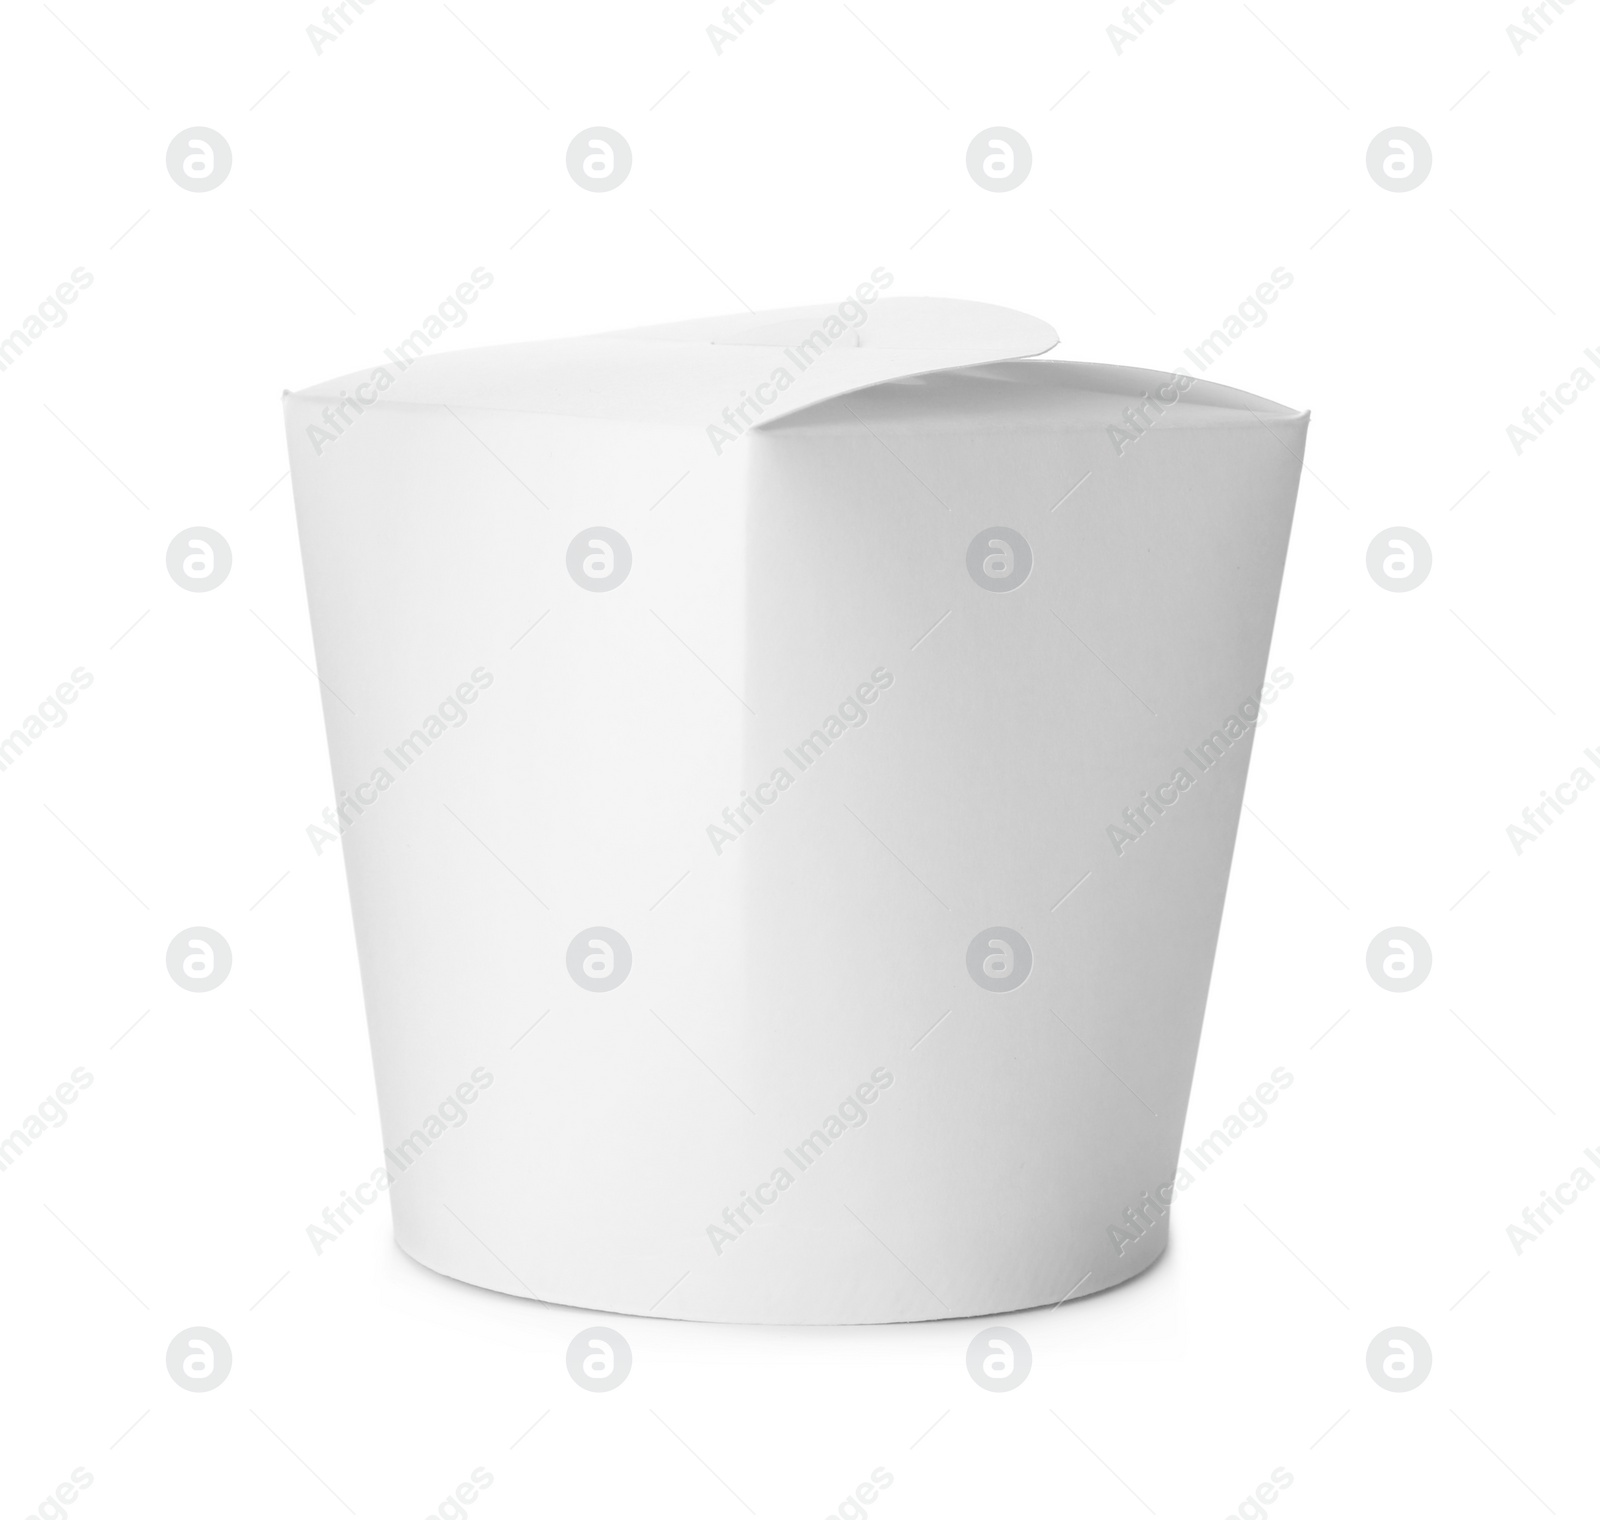 Photo of Takeaway paper box isolated on white. Mockup for design